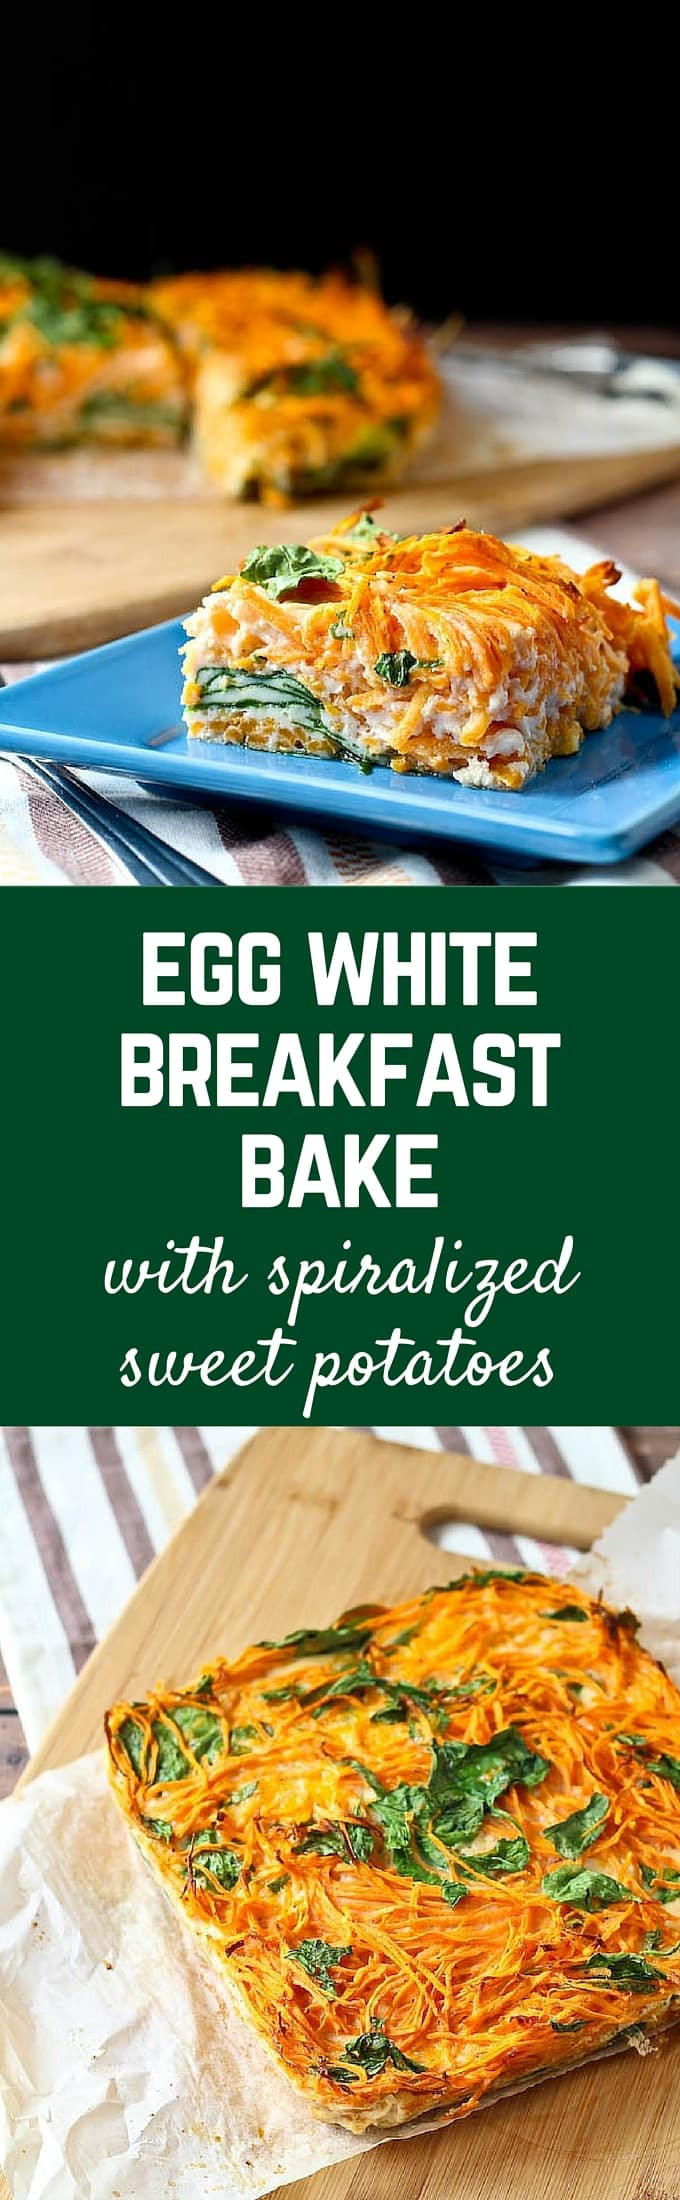 Egg Whites Breakfast Recipes
 Egg White Breakfast Bake with Sweet Potato and Spinach